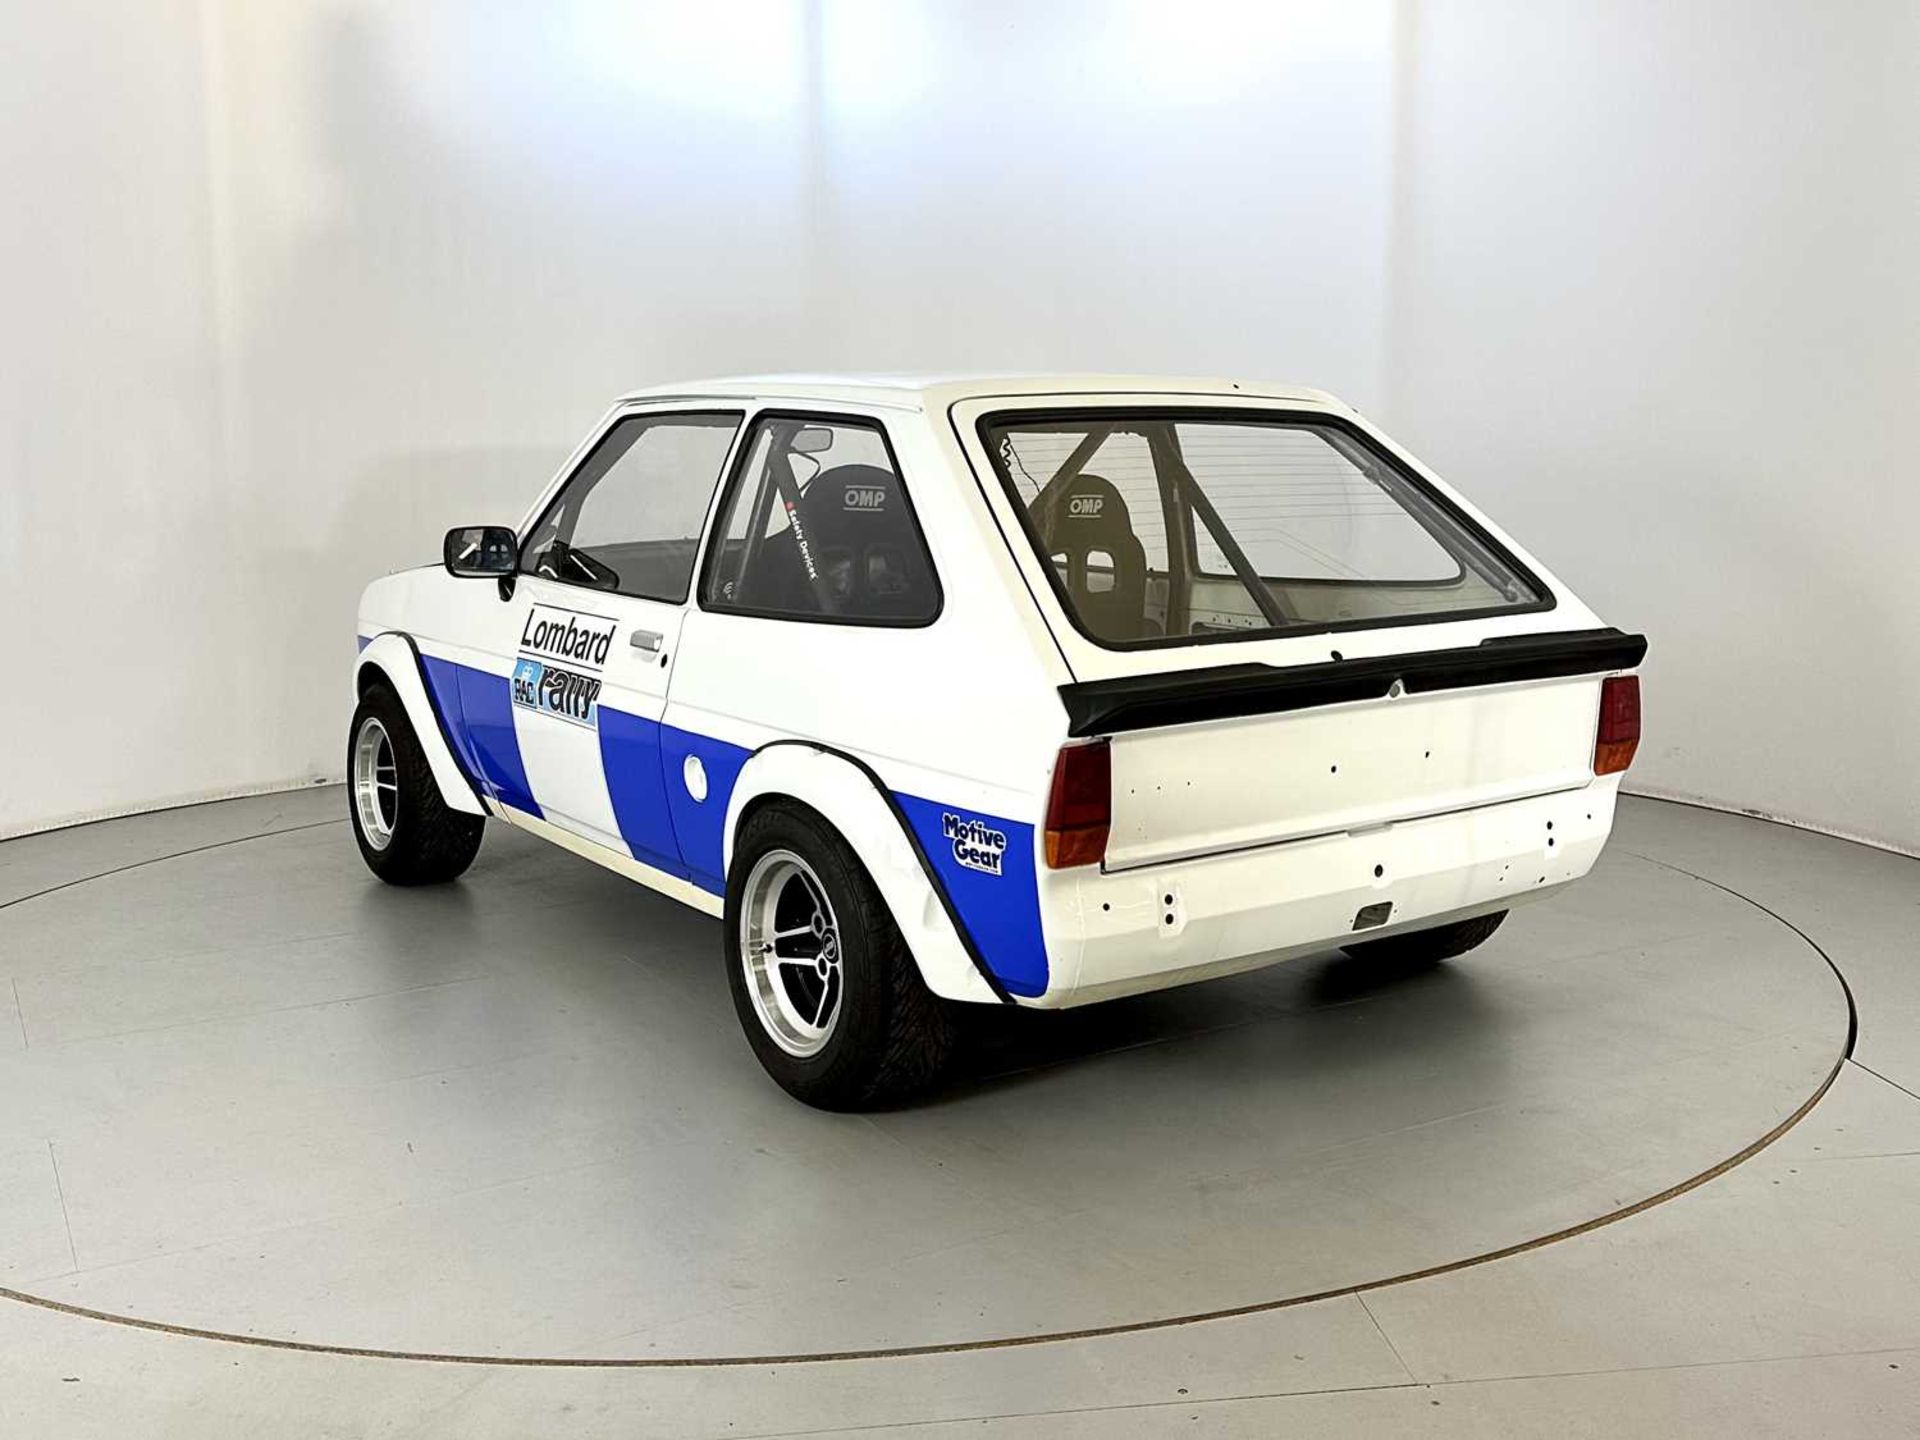 1983 Ford Fiesta XR2 - Image 7 of 28